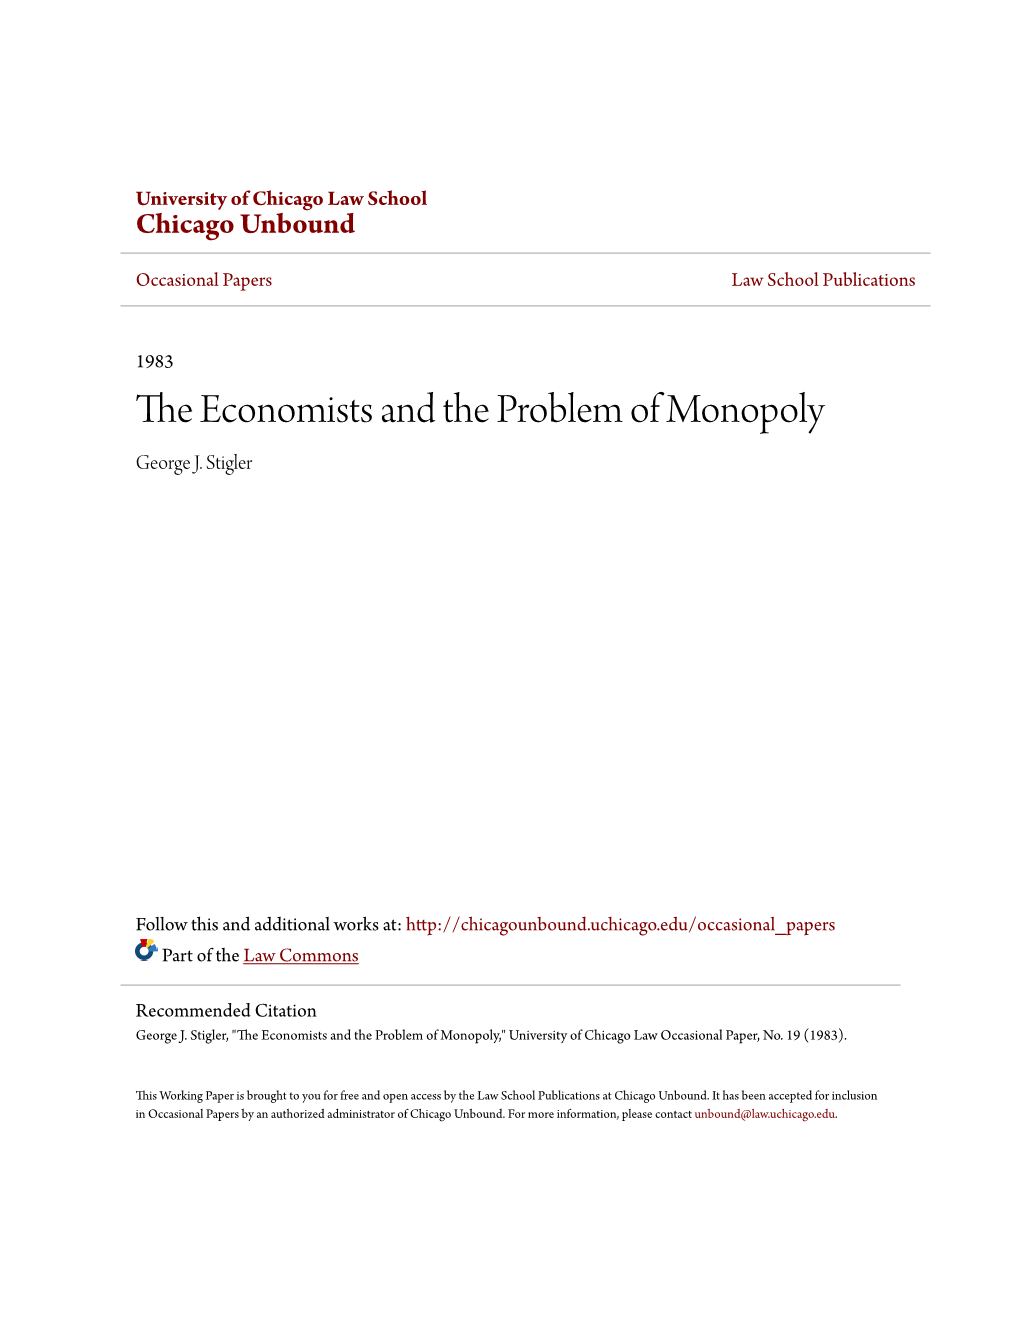 The Economists and the Problem of Monopoly George J